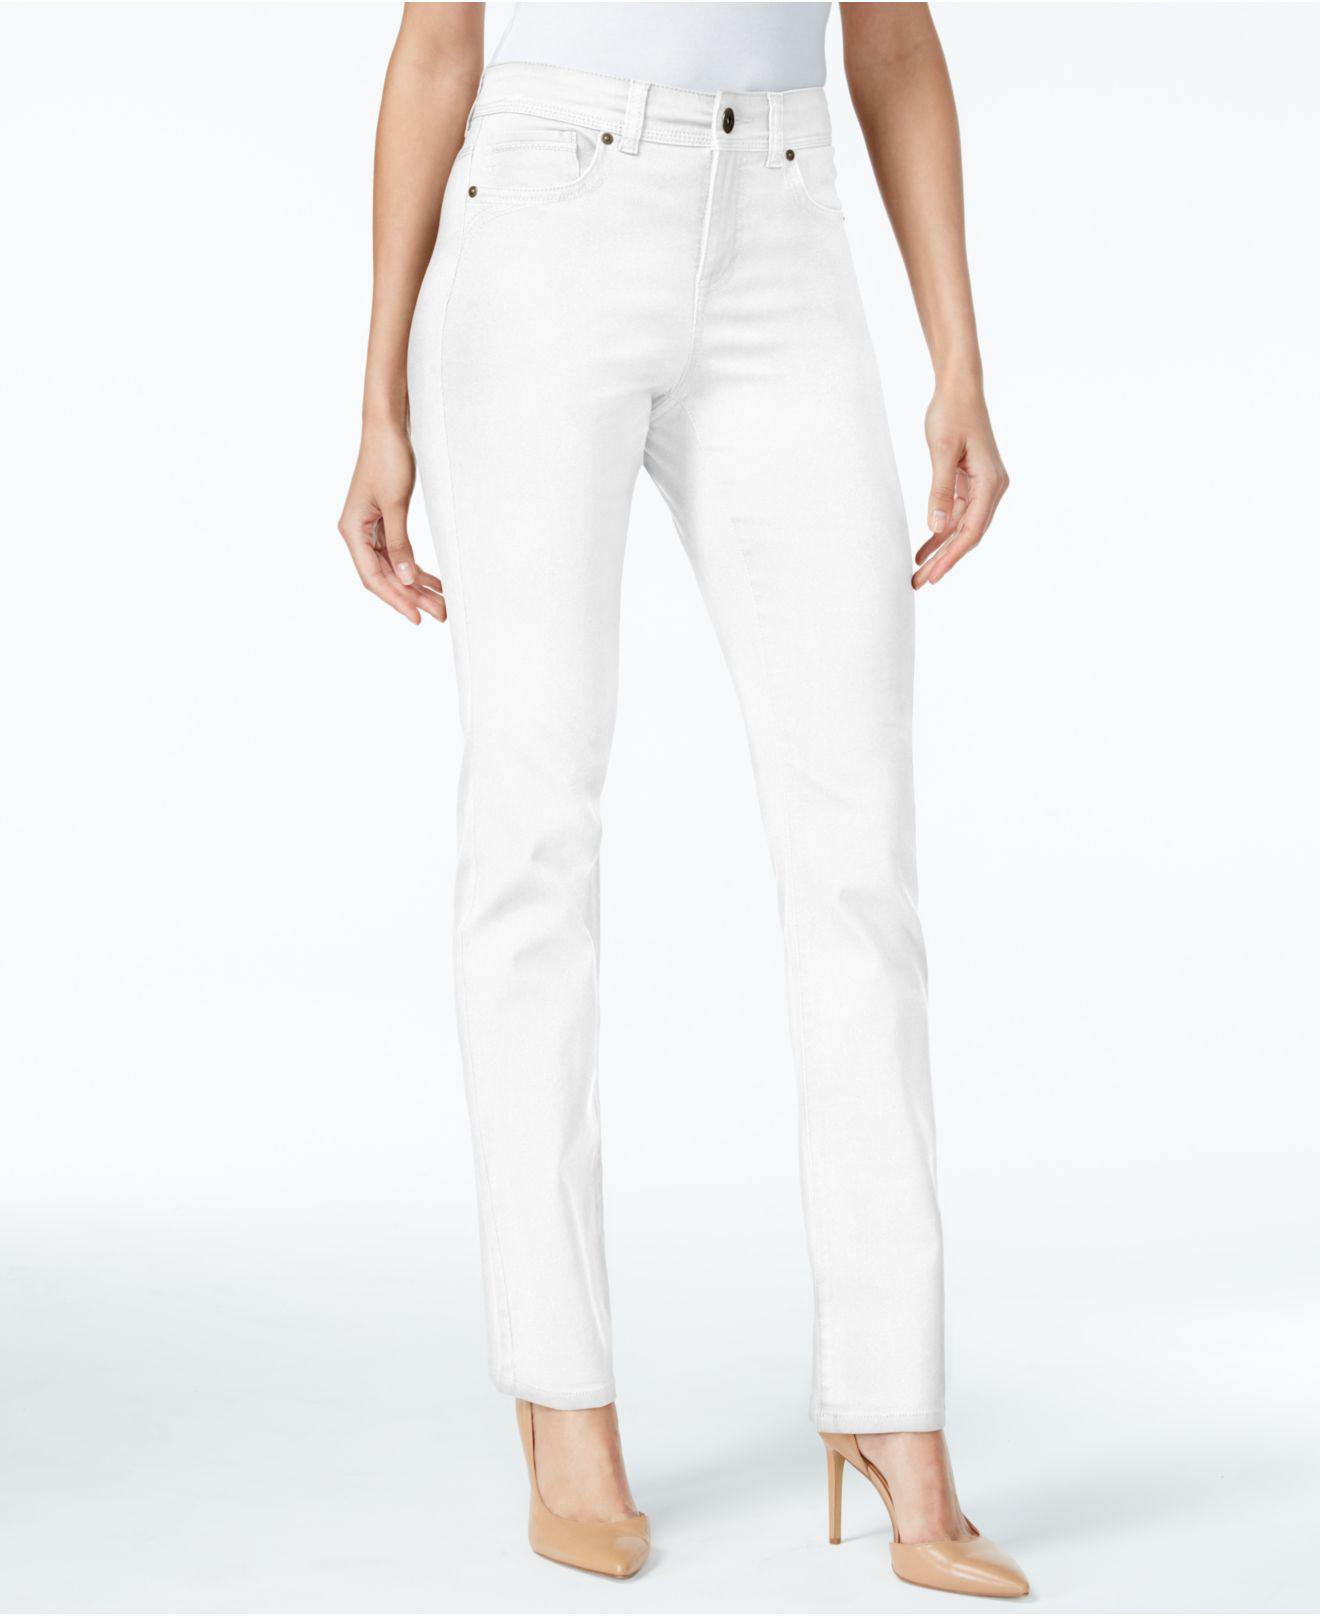 Lyst - Style & Co. Petite Solid Straight-leg Jeans in White - Save 48%